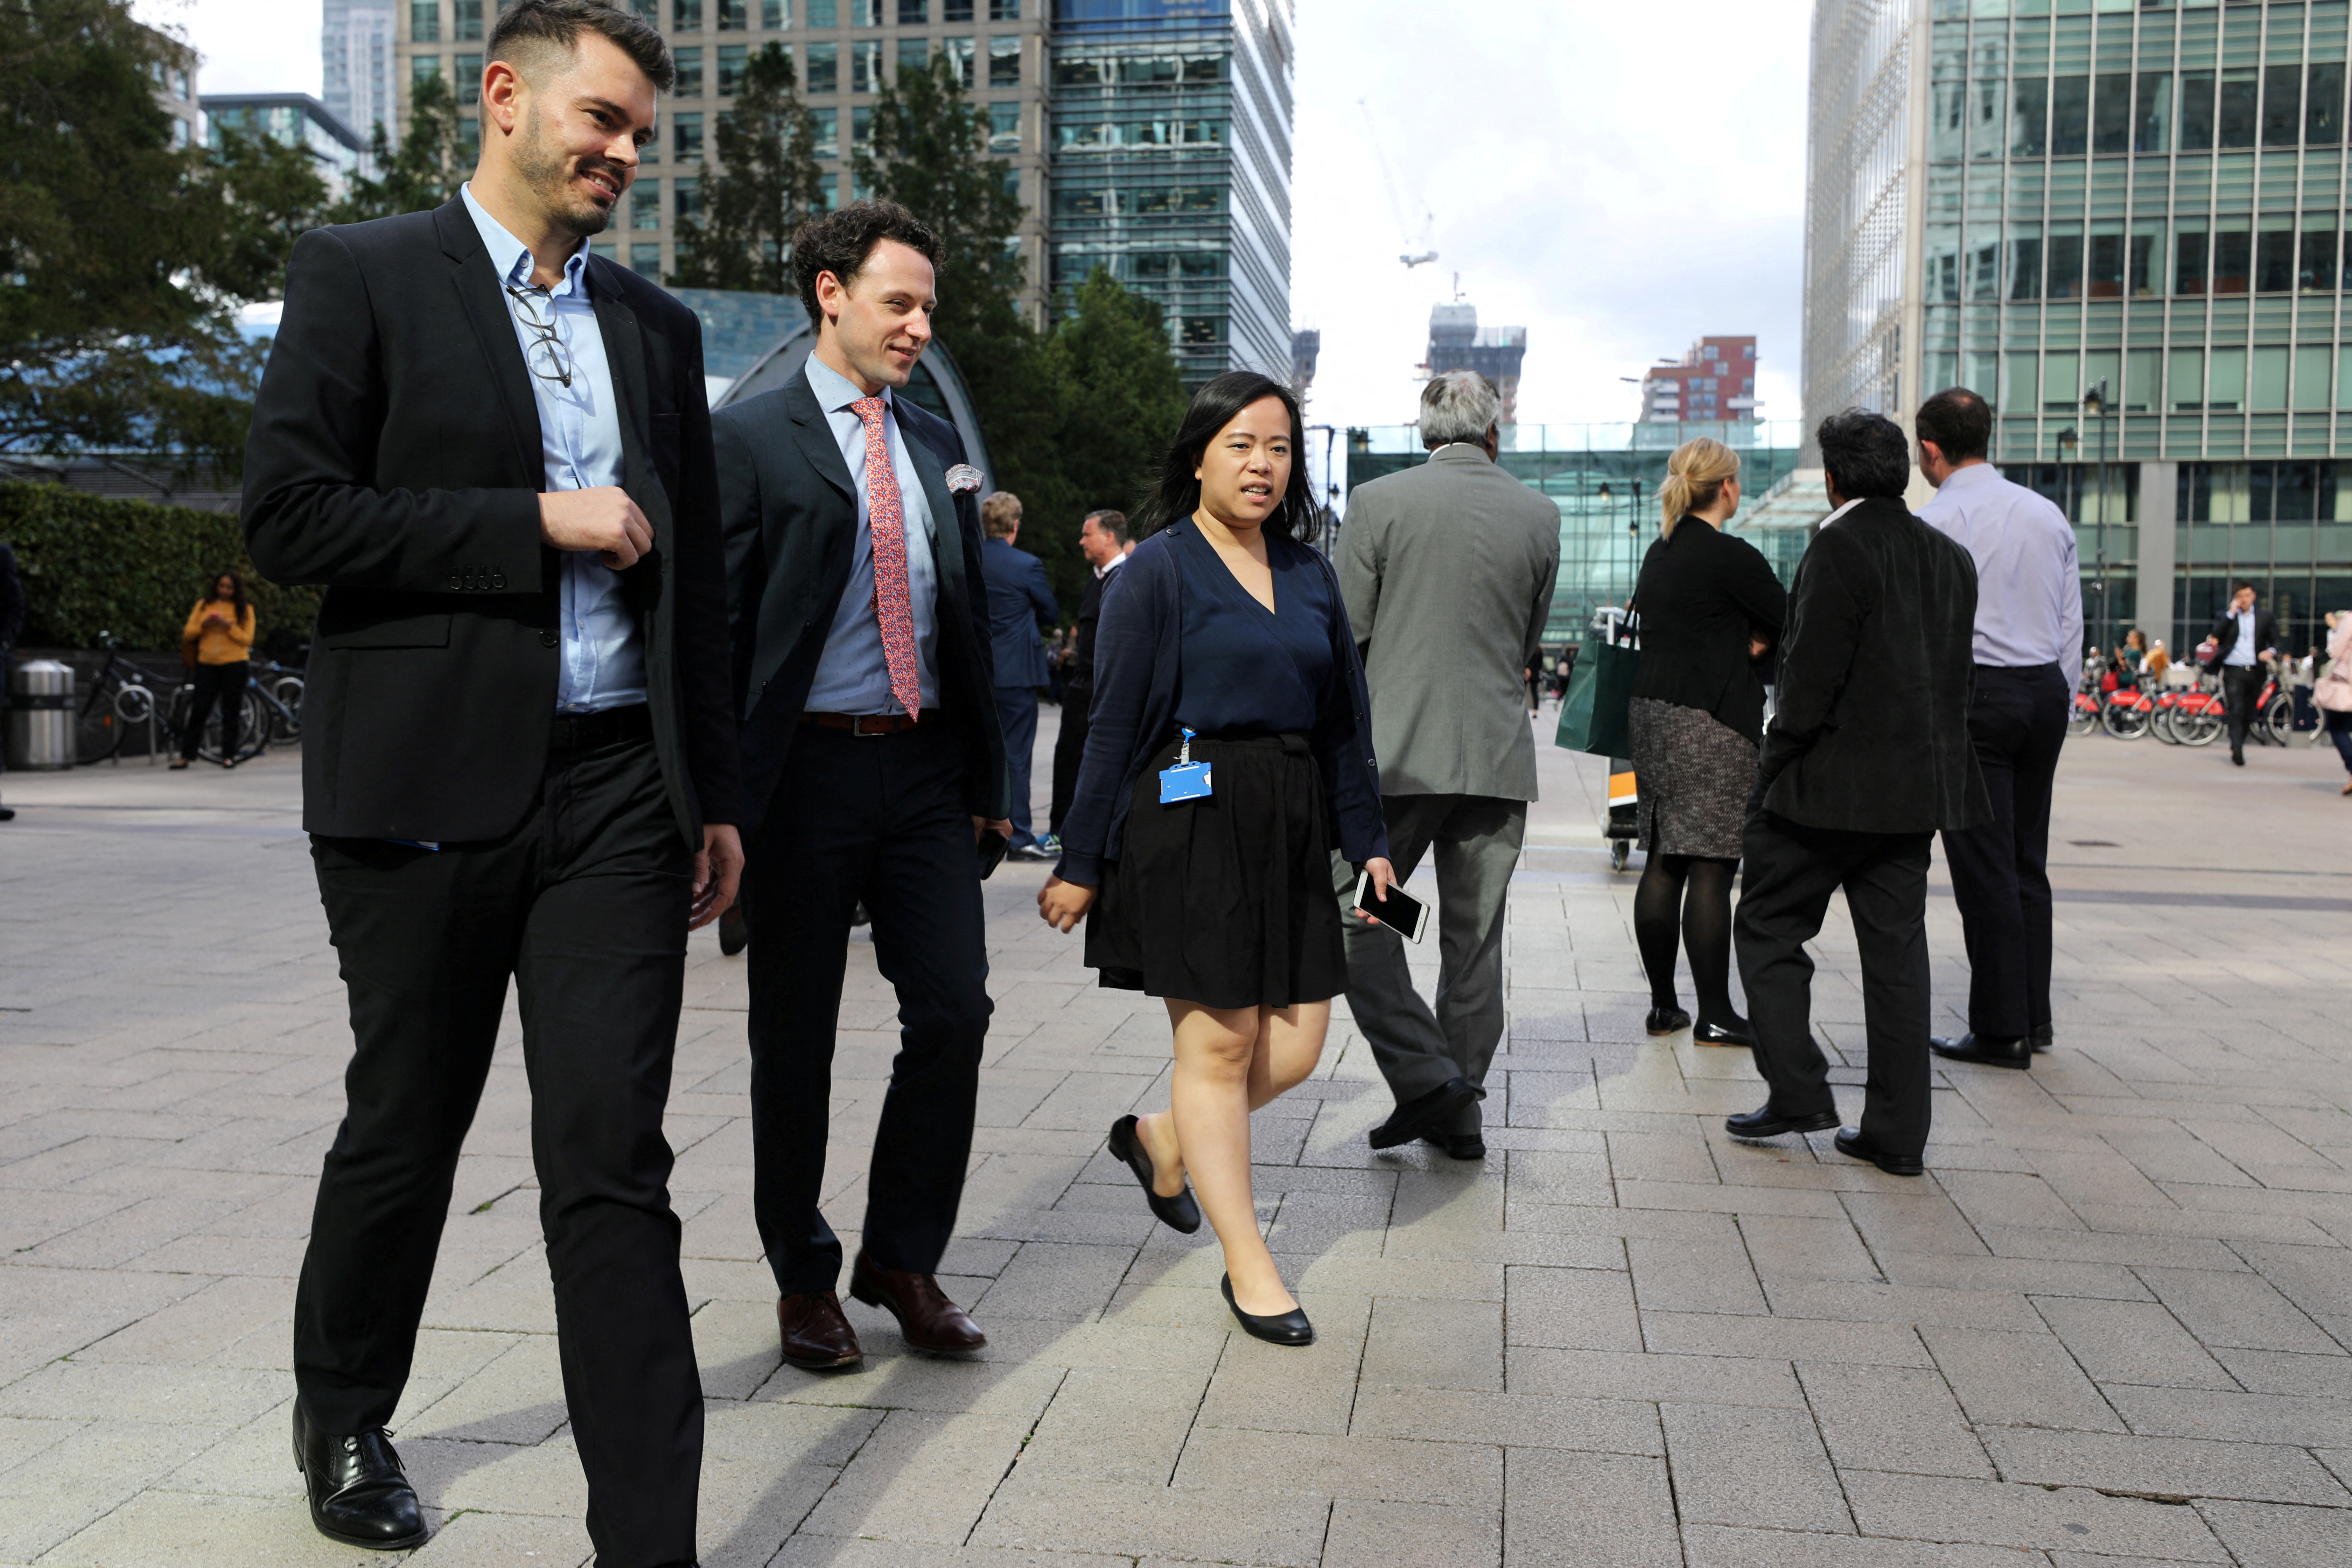 People walk through the financial district of Canary Wharf, London